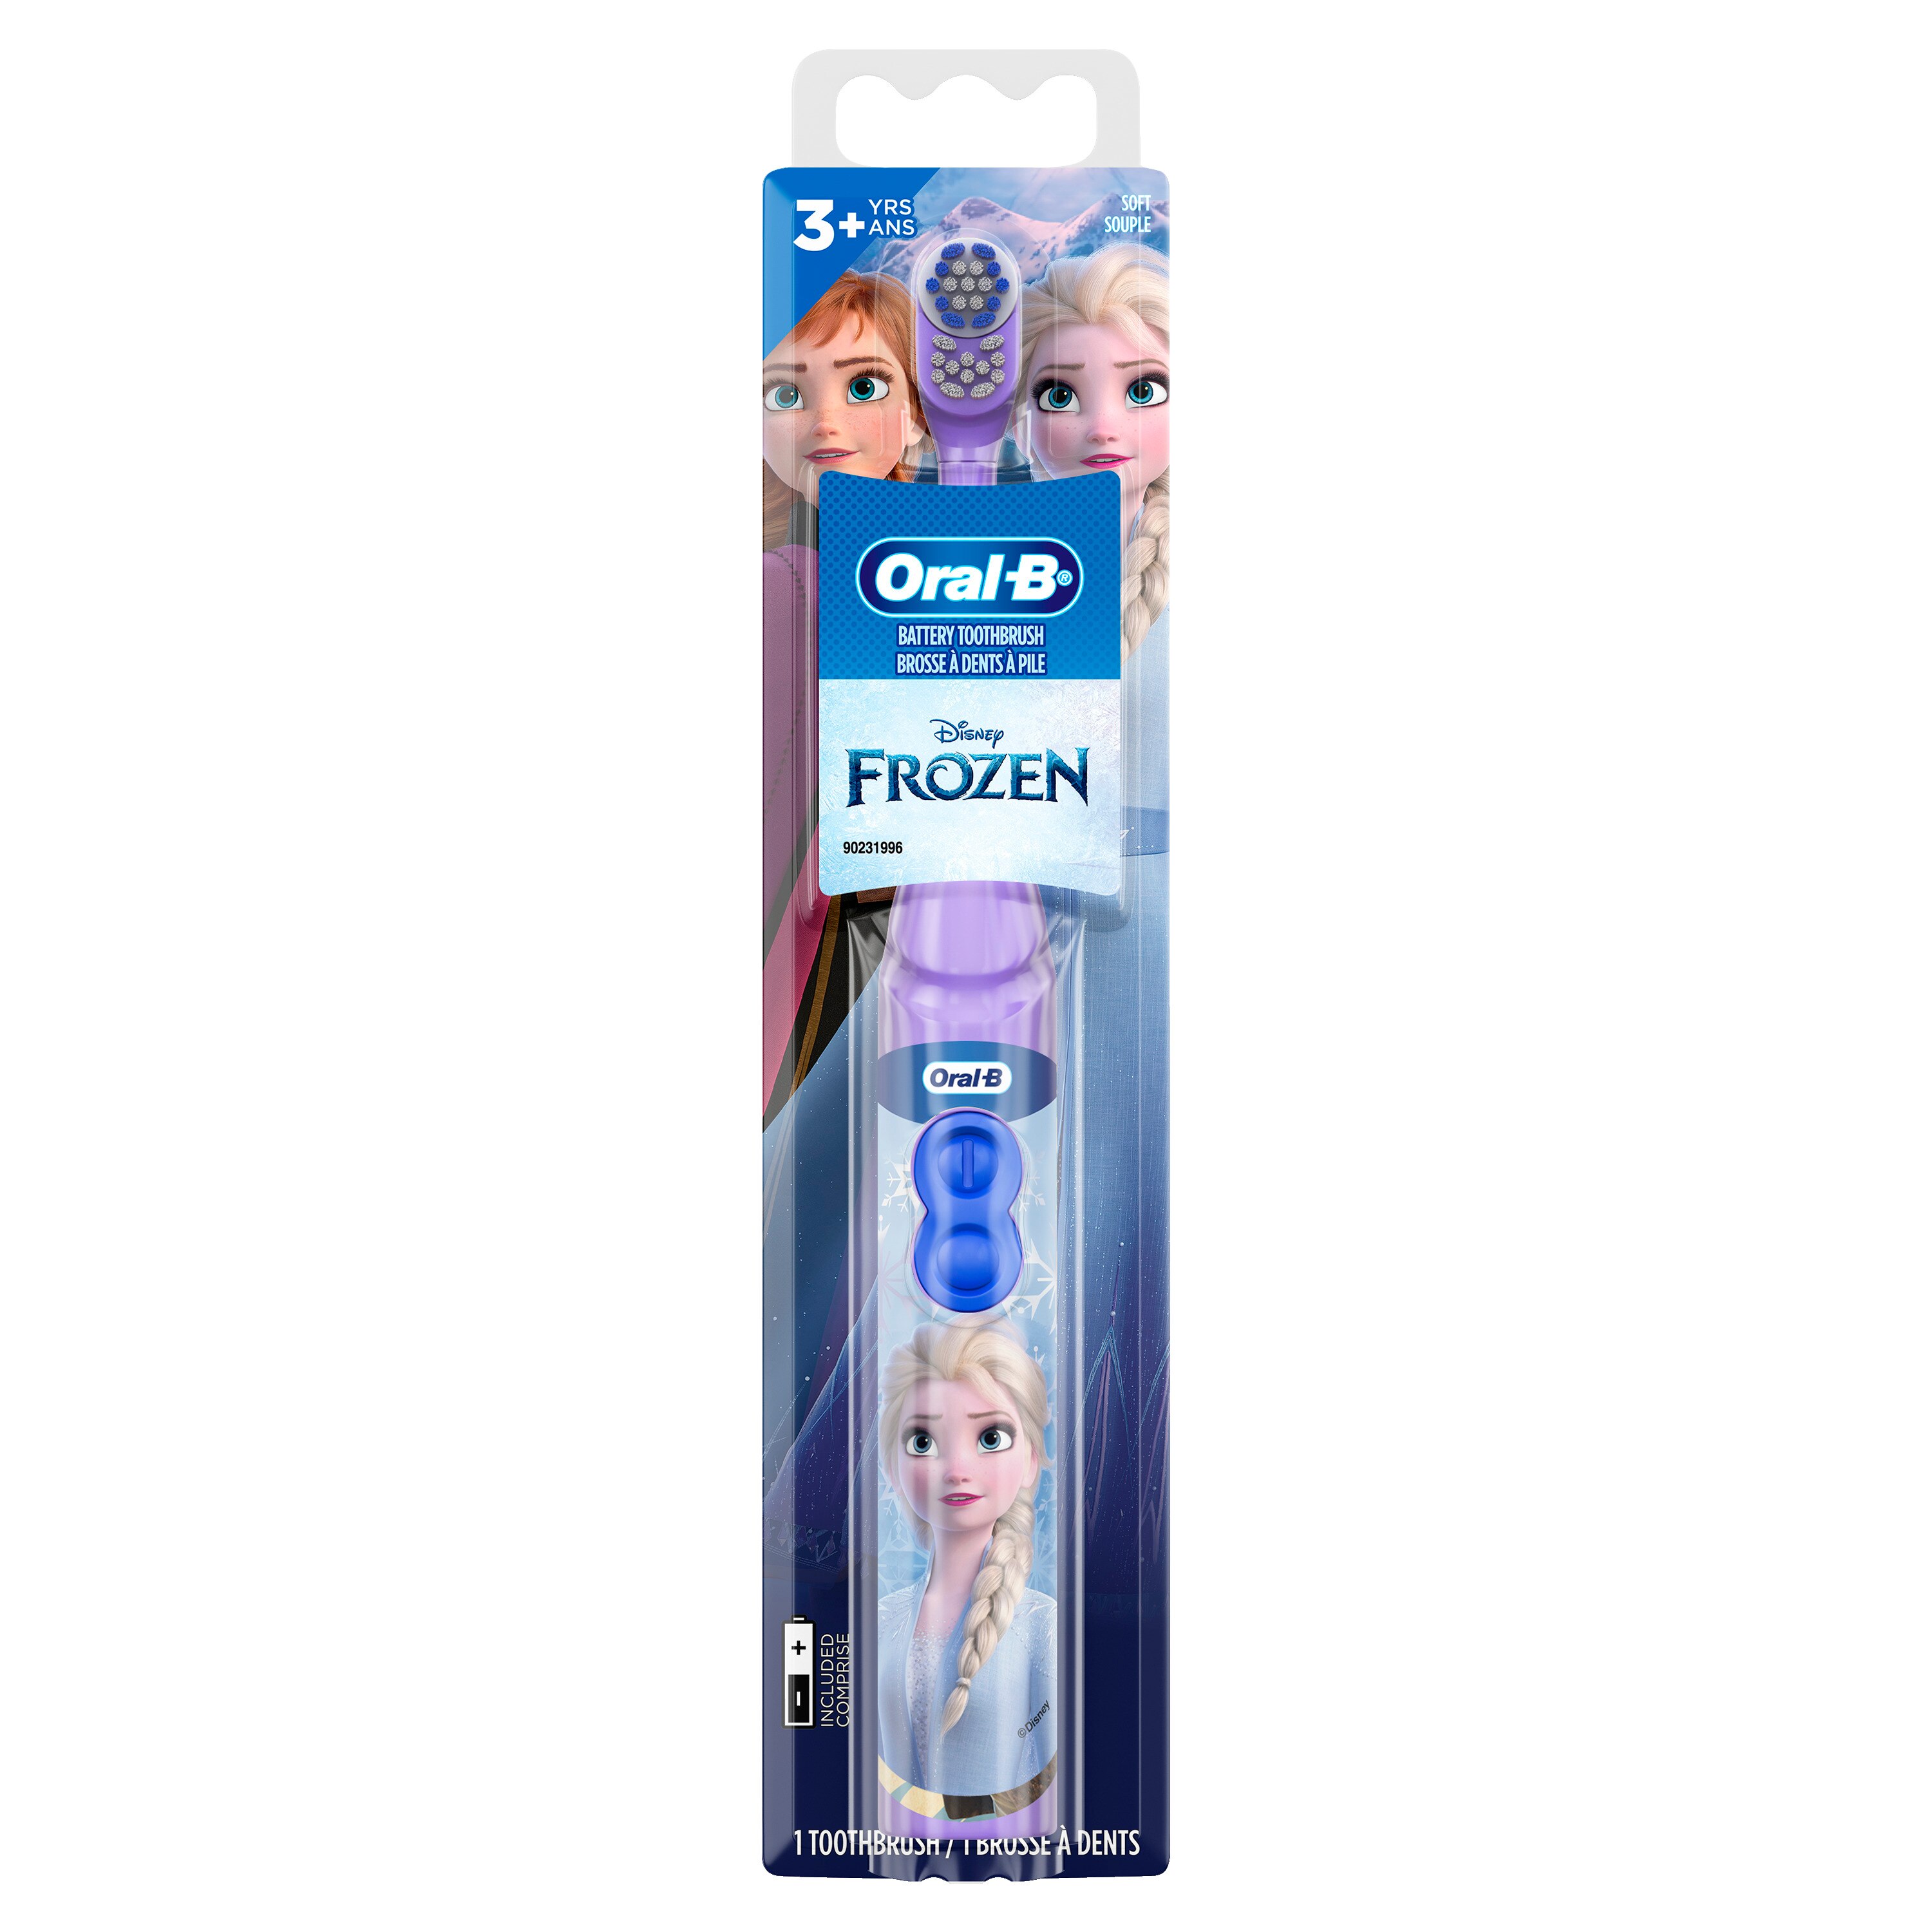 Oral-B Kid's Disney Frozen Battery Powered Toothbrush, 3+ Years, Soft Bristle